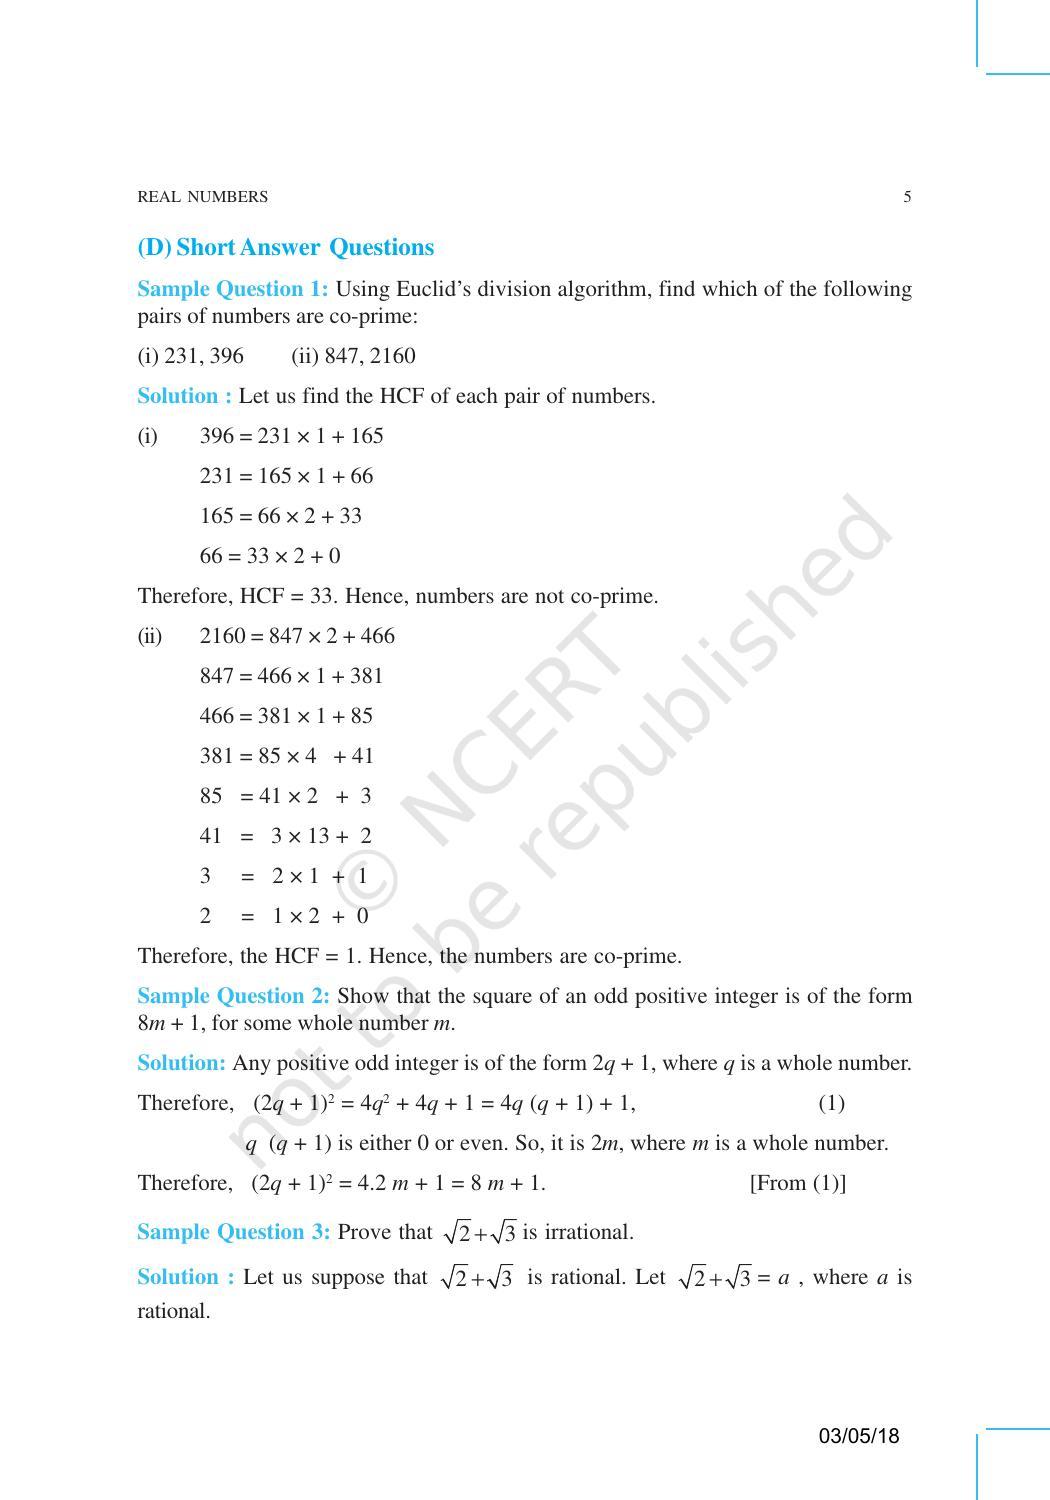 NCERT Exemplar Book for Class 10 Maths: Chapter 1 Real Numbers - Page 5